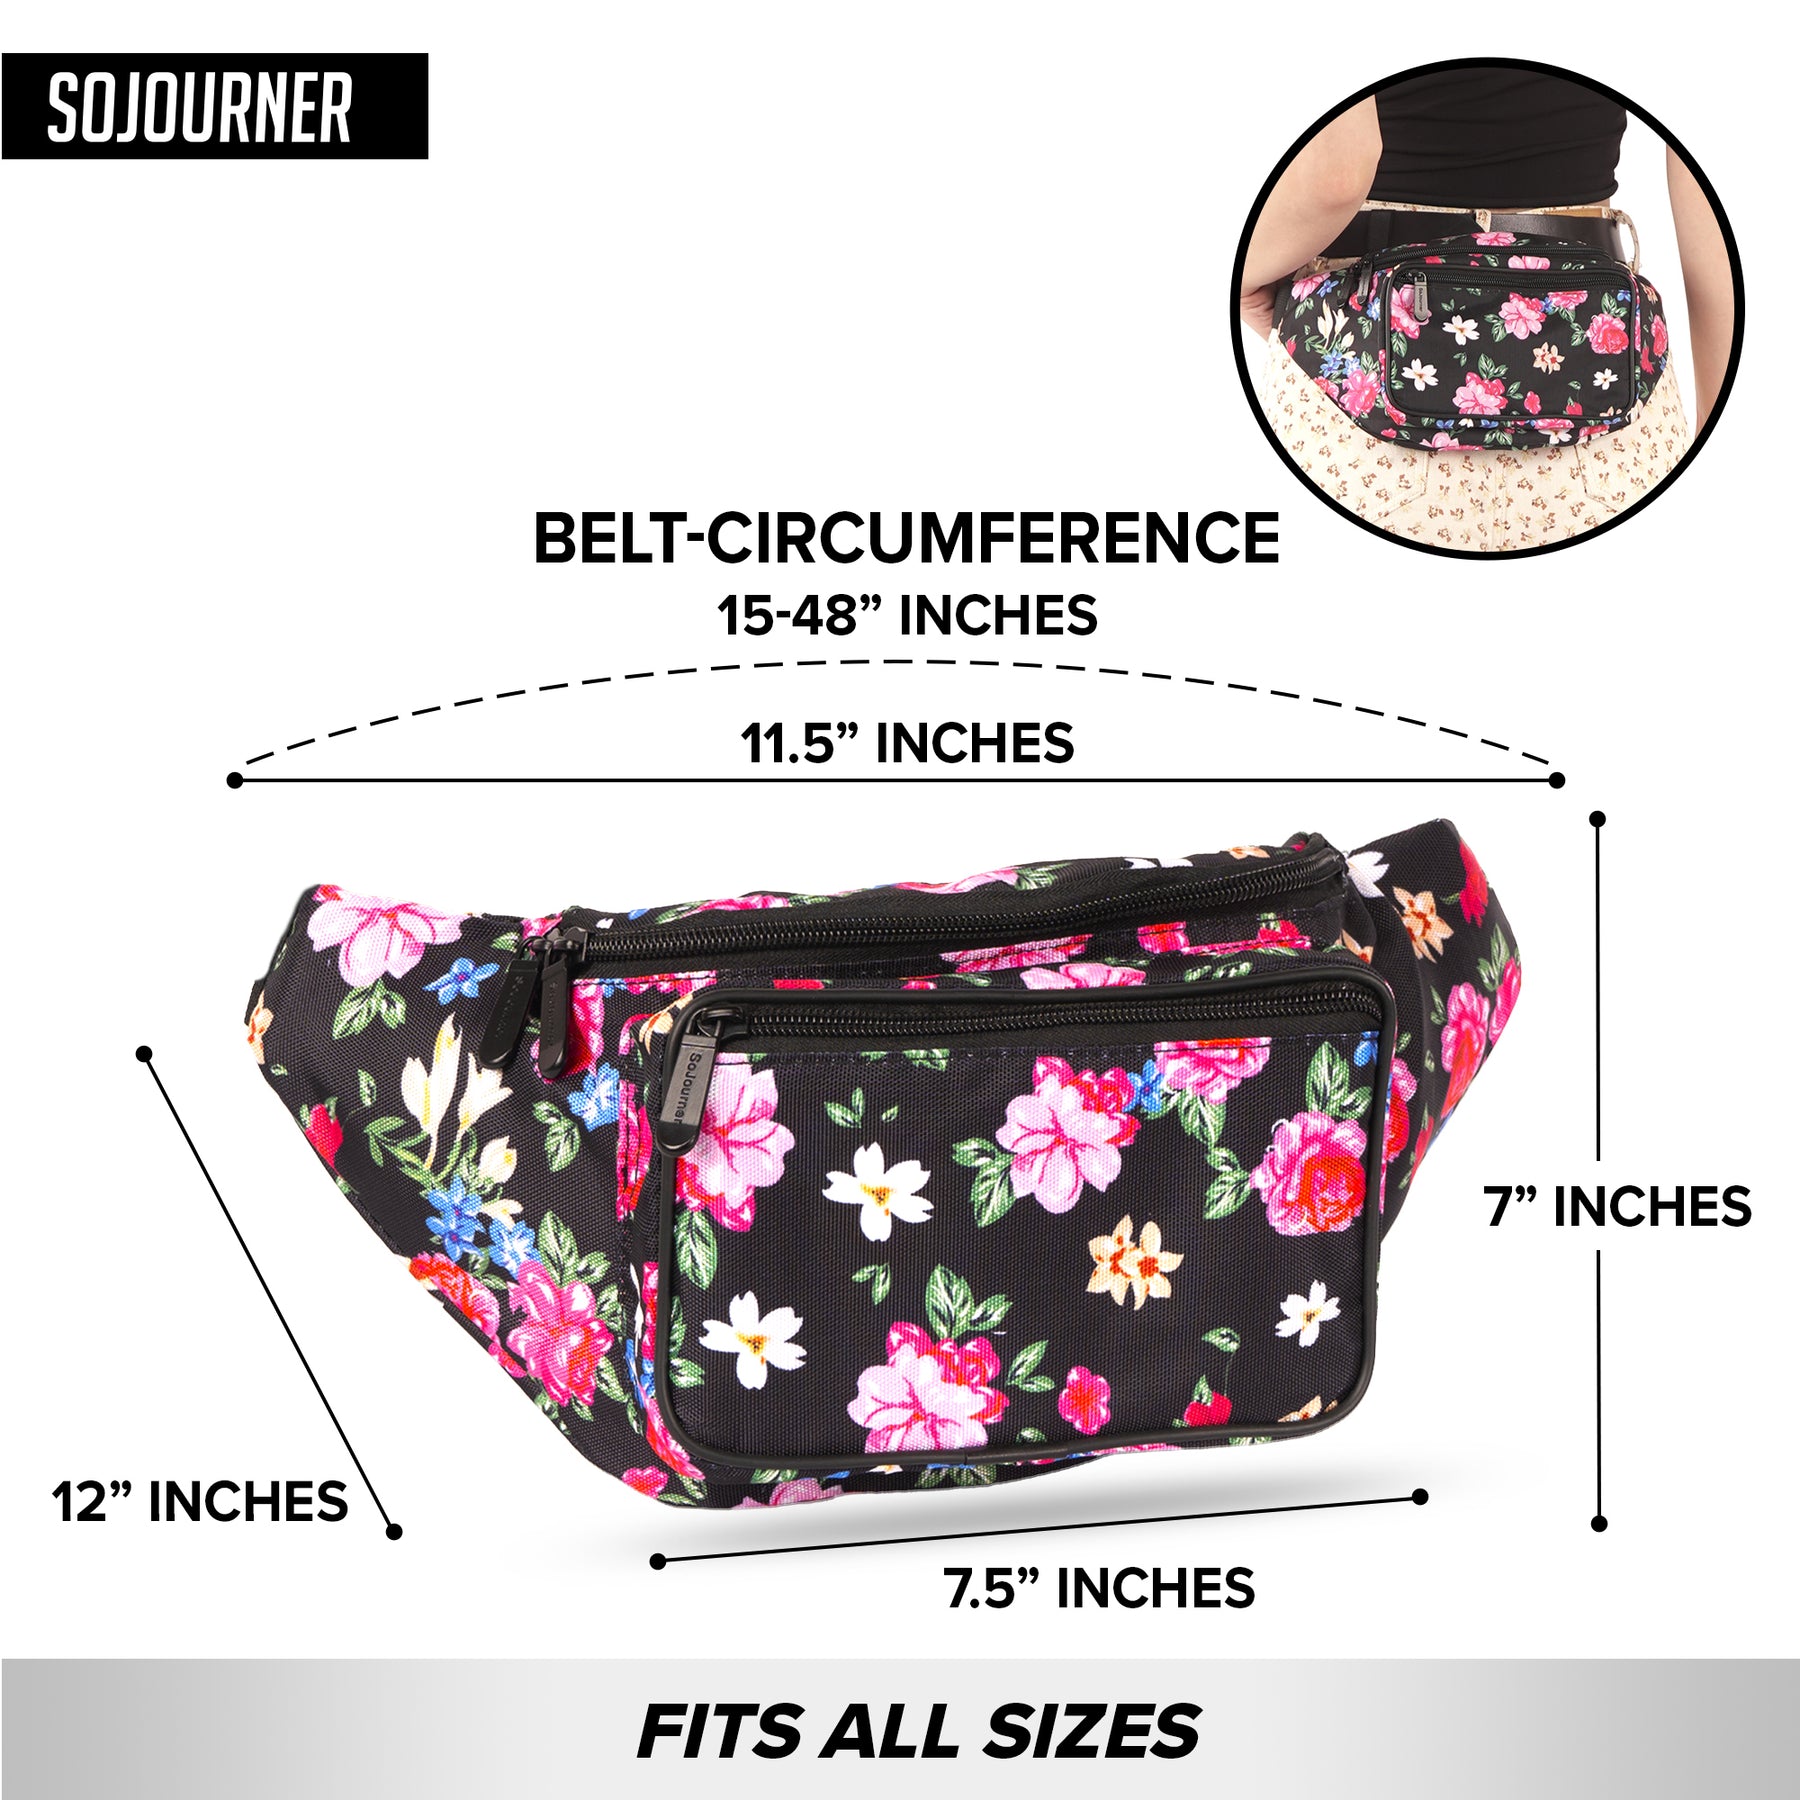 SoJourner Bags: Where's the Pack at?